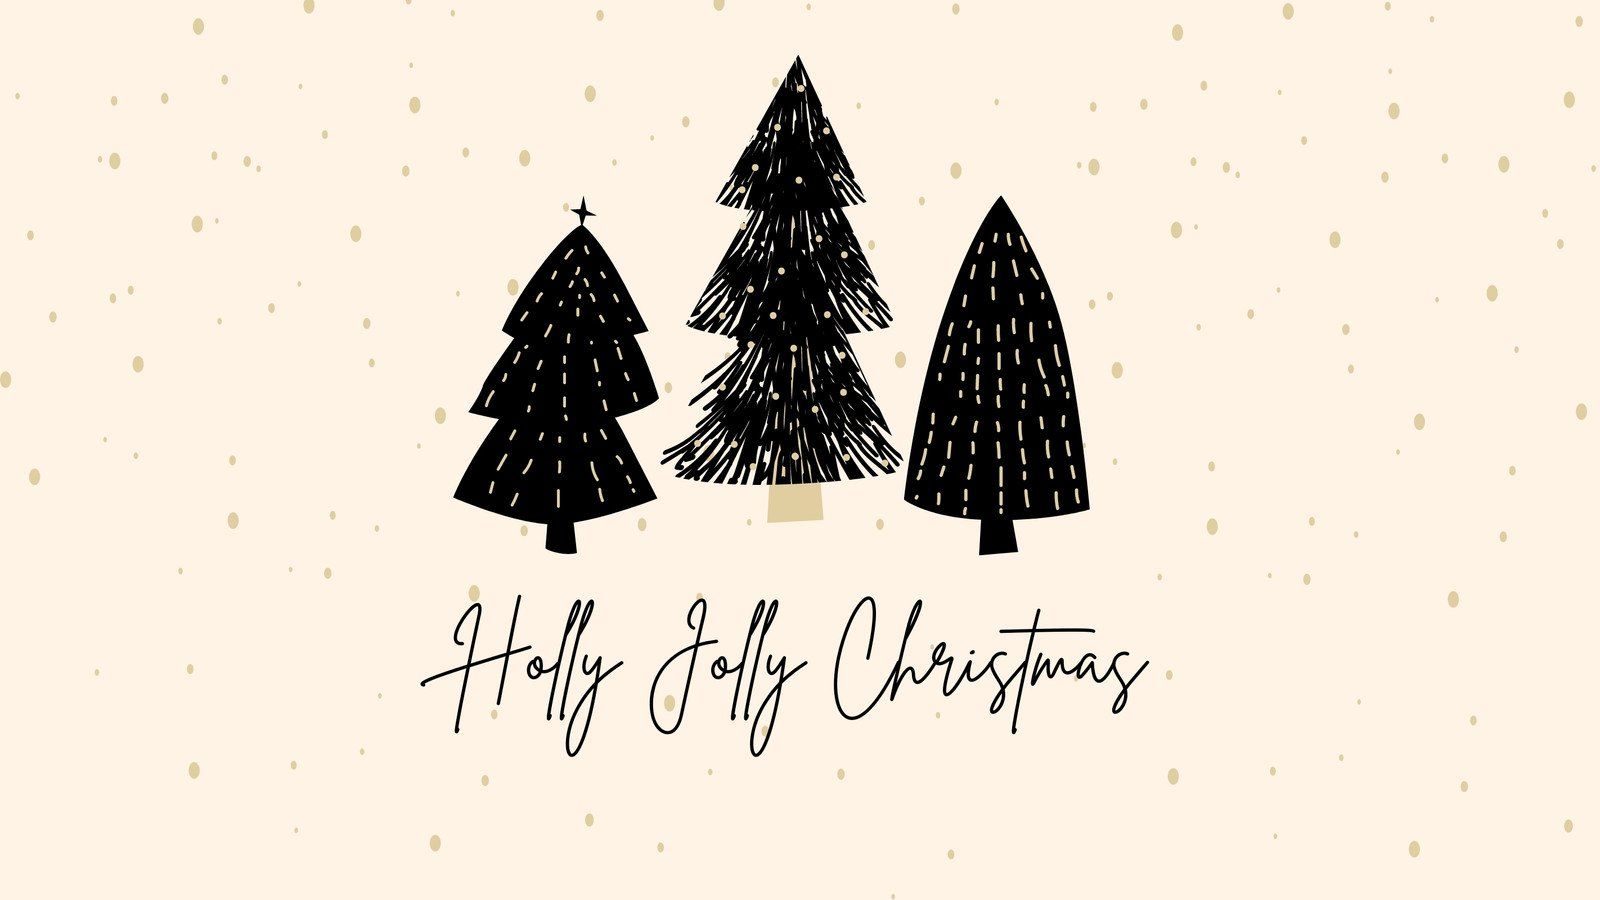 A Christmas background with three black Christmas trees on a light yellow background - White Christmas